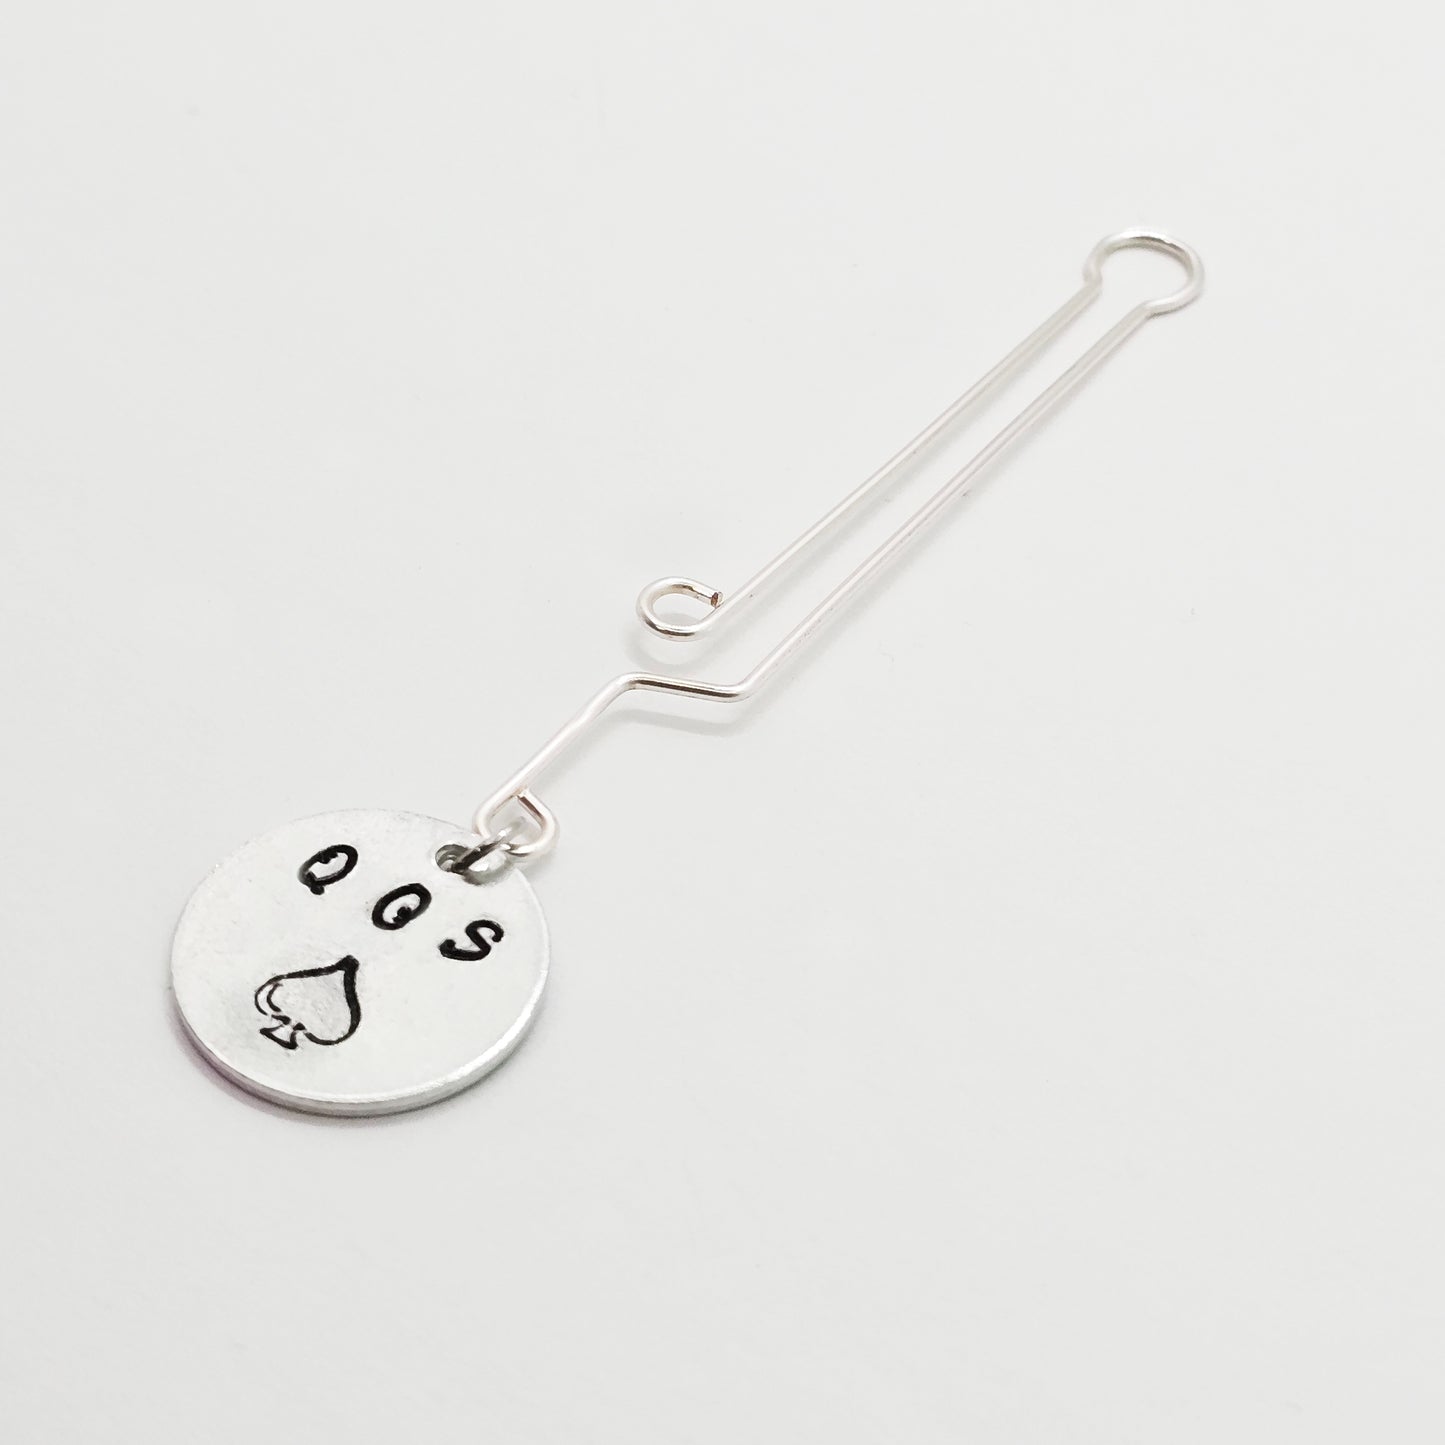 Queen of Spades Labia Clip. Non-Piercing Clit Jewelry with QOS Stamp for Hot Wife.